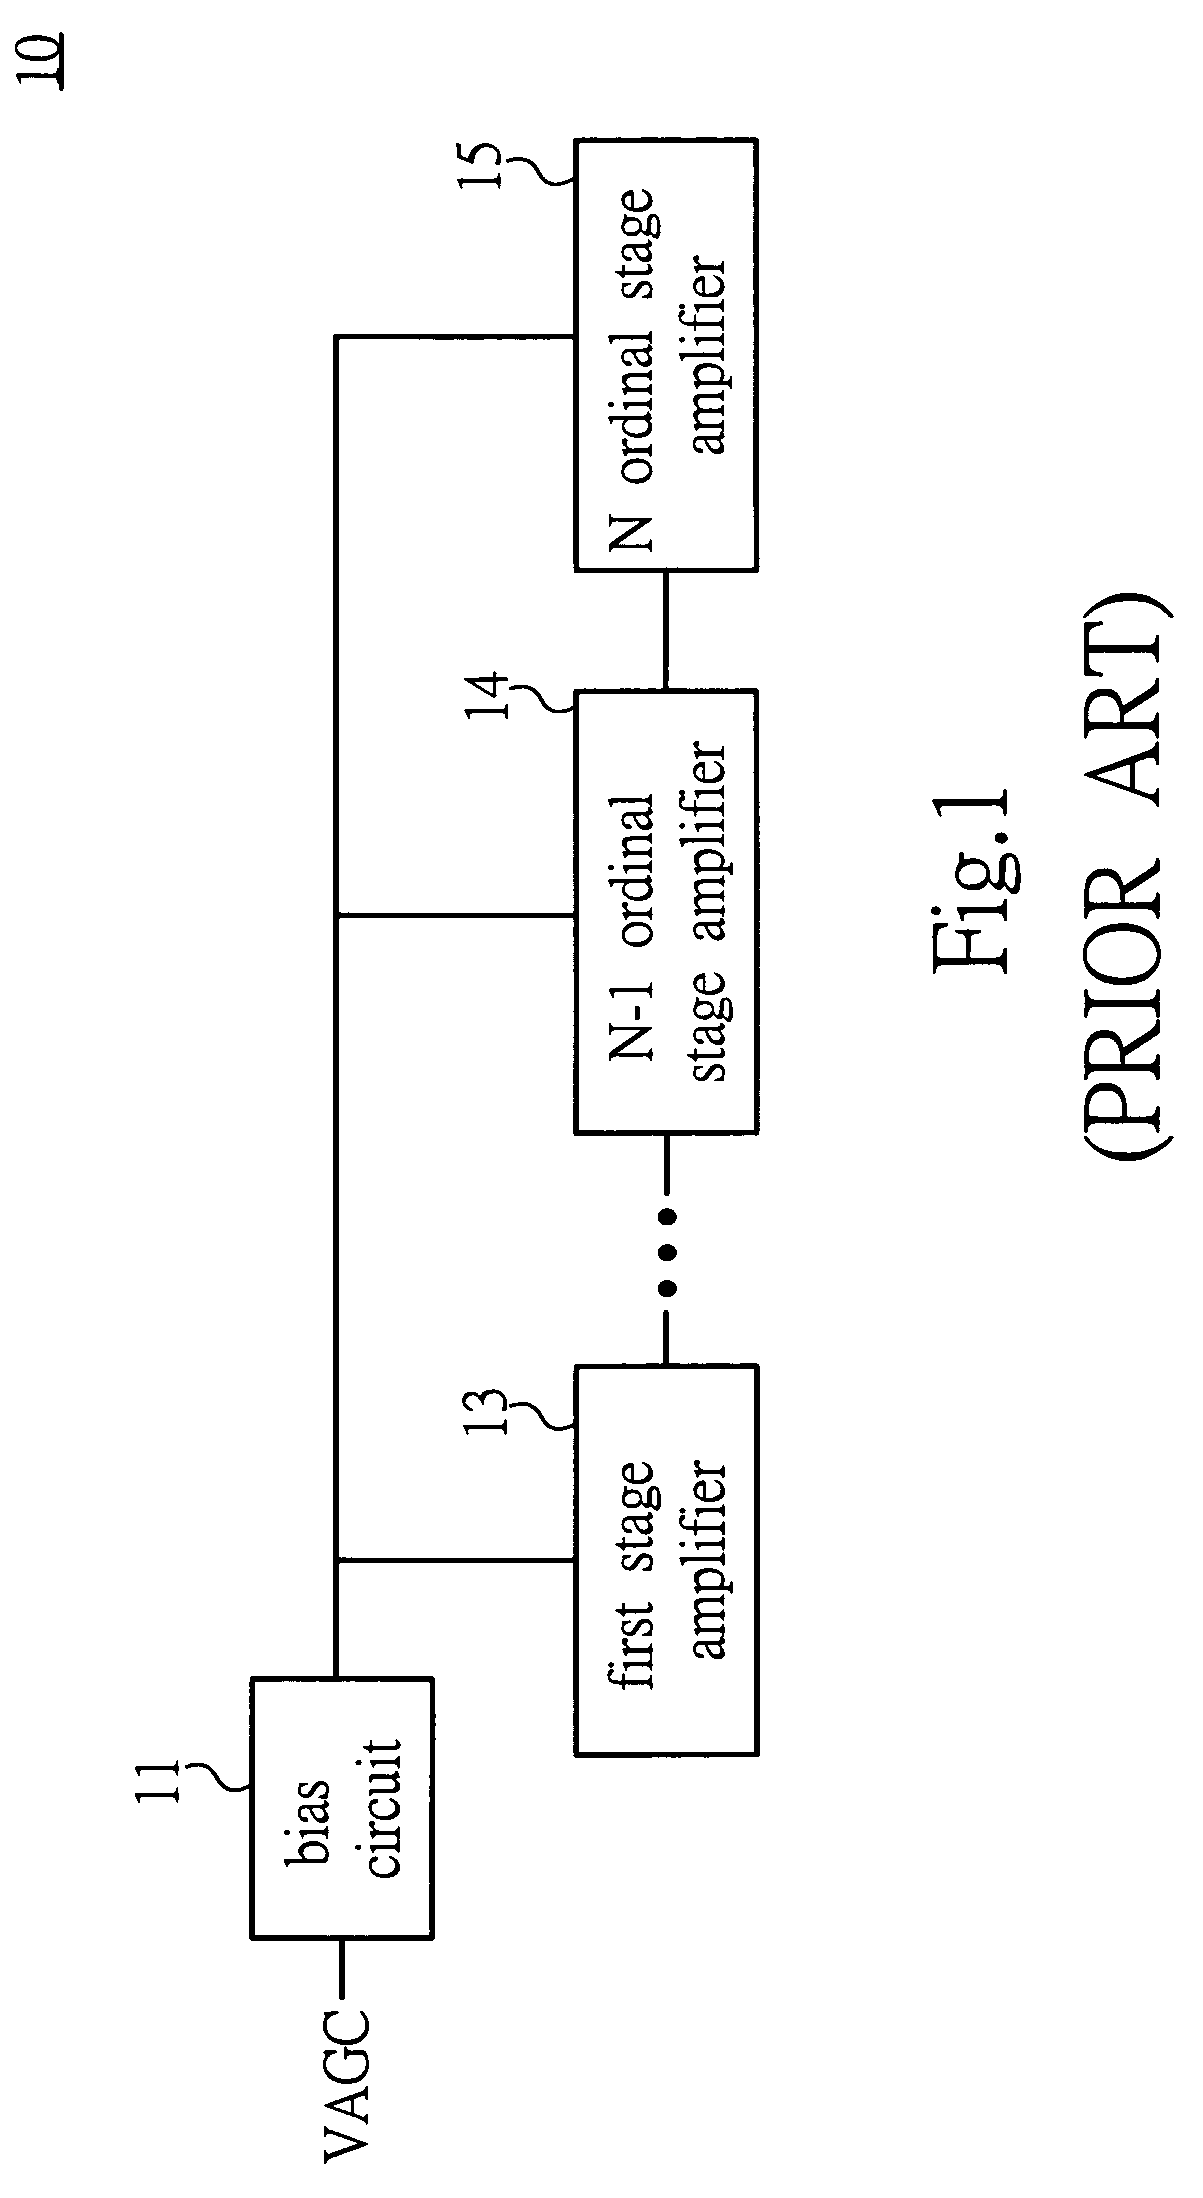 Amplifier gain control circuit for the wireless transceiver